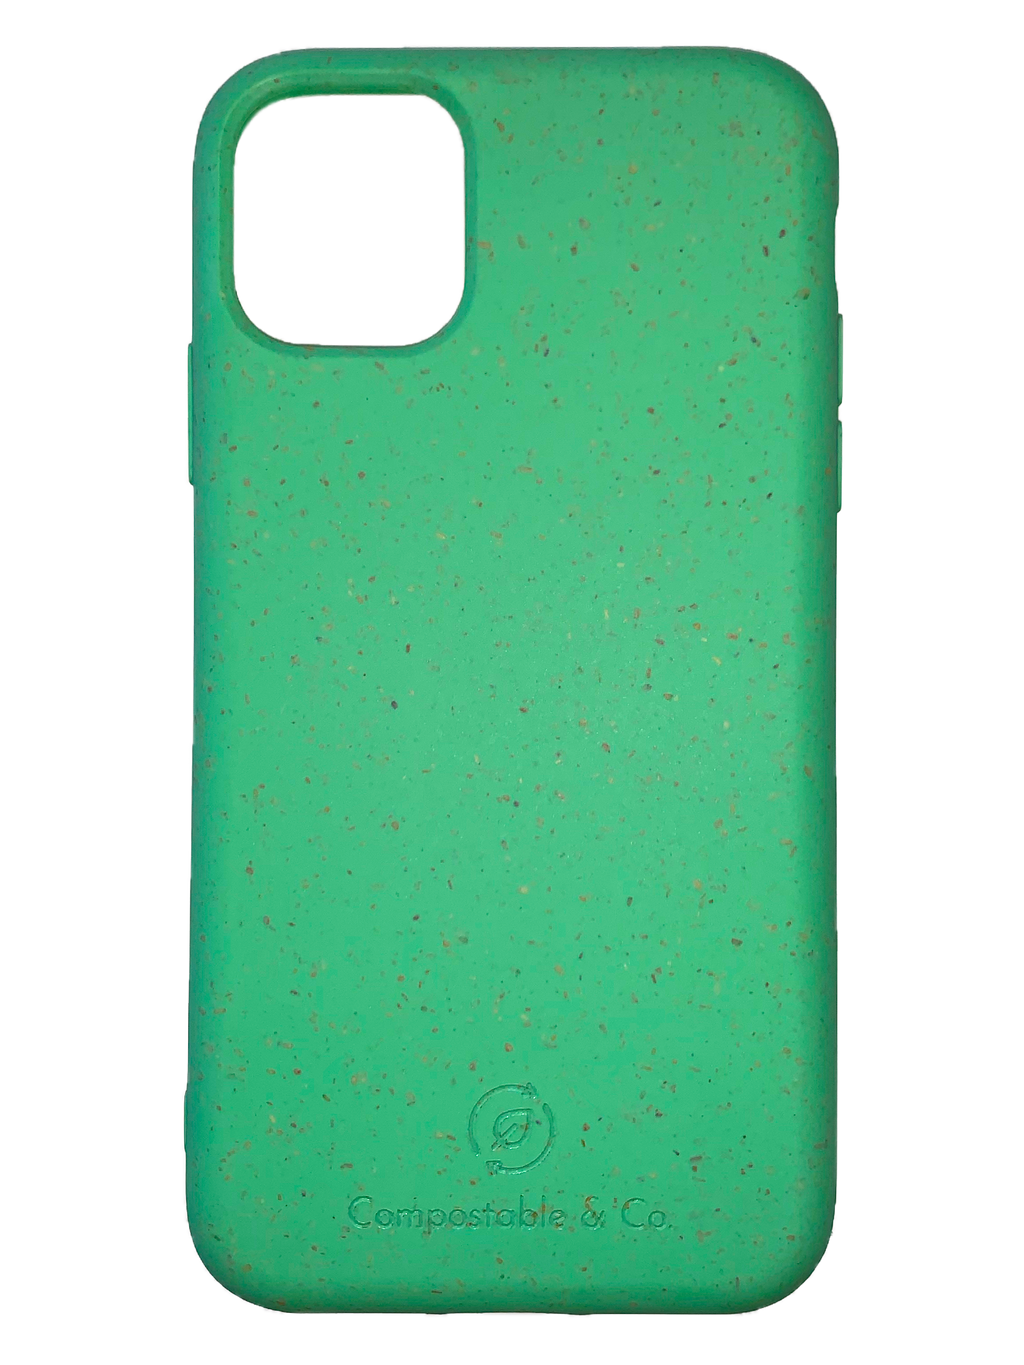 Compostable & Co. iPhone 11 pro max green biodegradable phone case